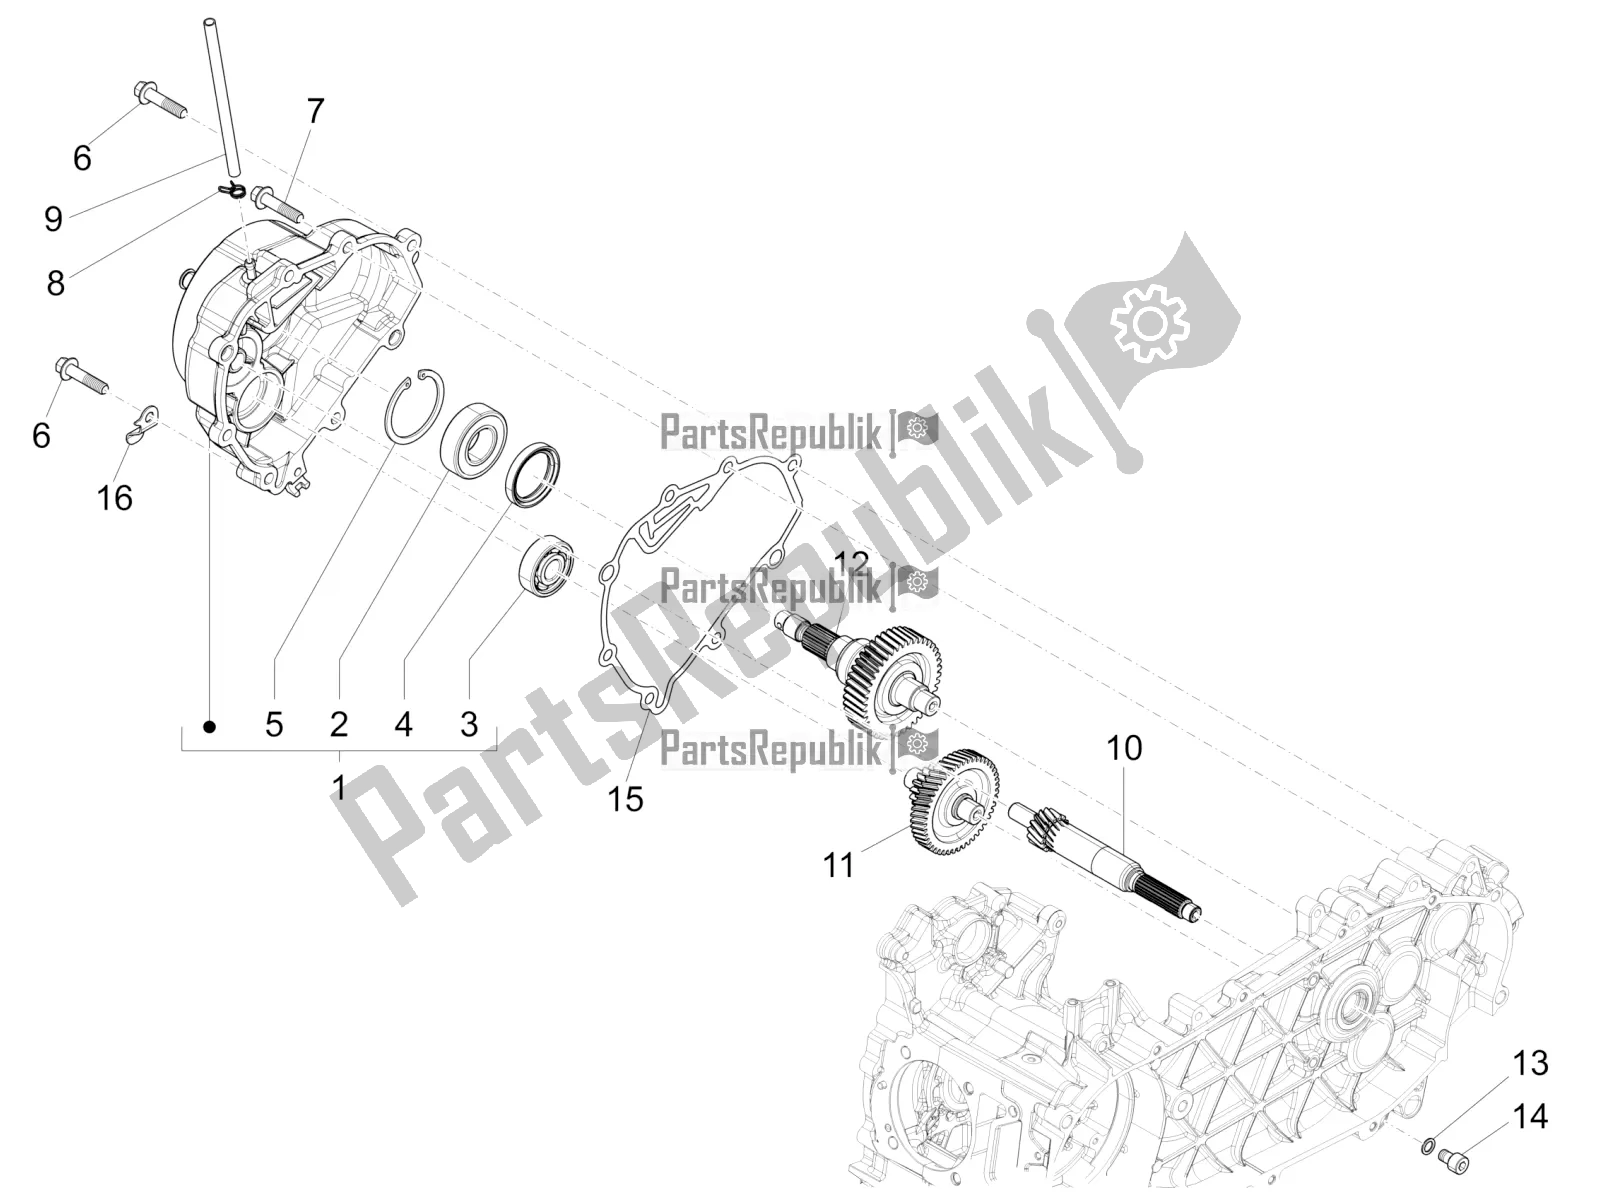 All parts for the Reduction Unit of the Vespa 946 150 ABS CD Apac 2022